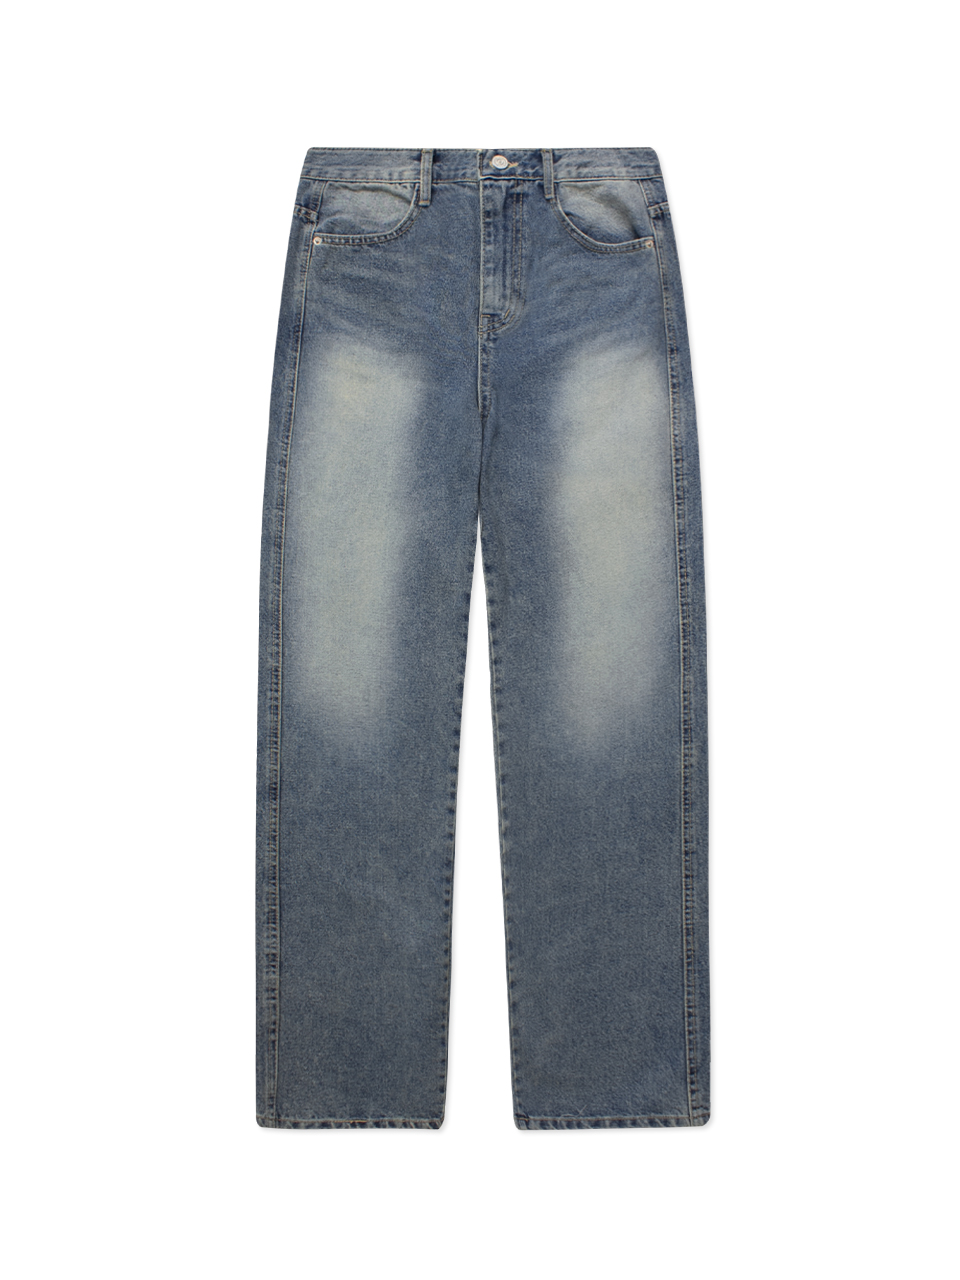 [WIDE] Lucid Jeans